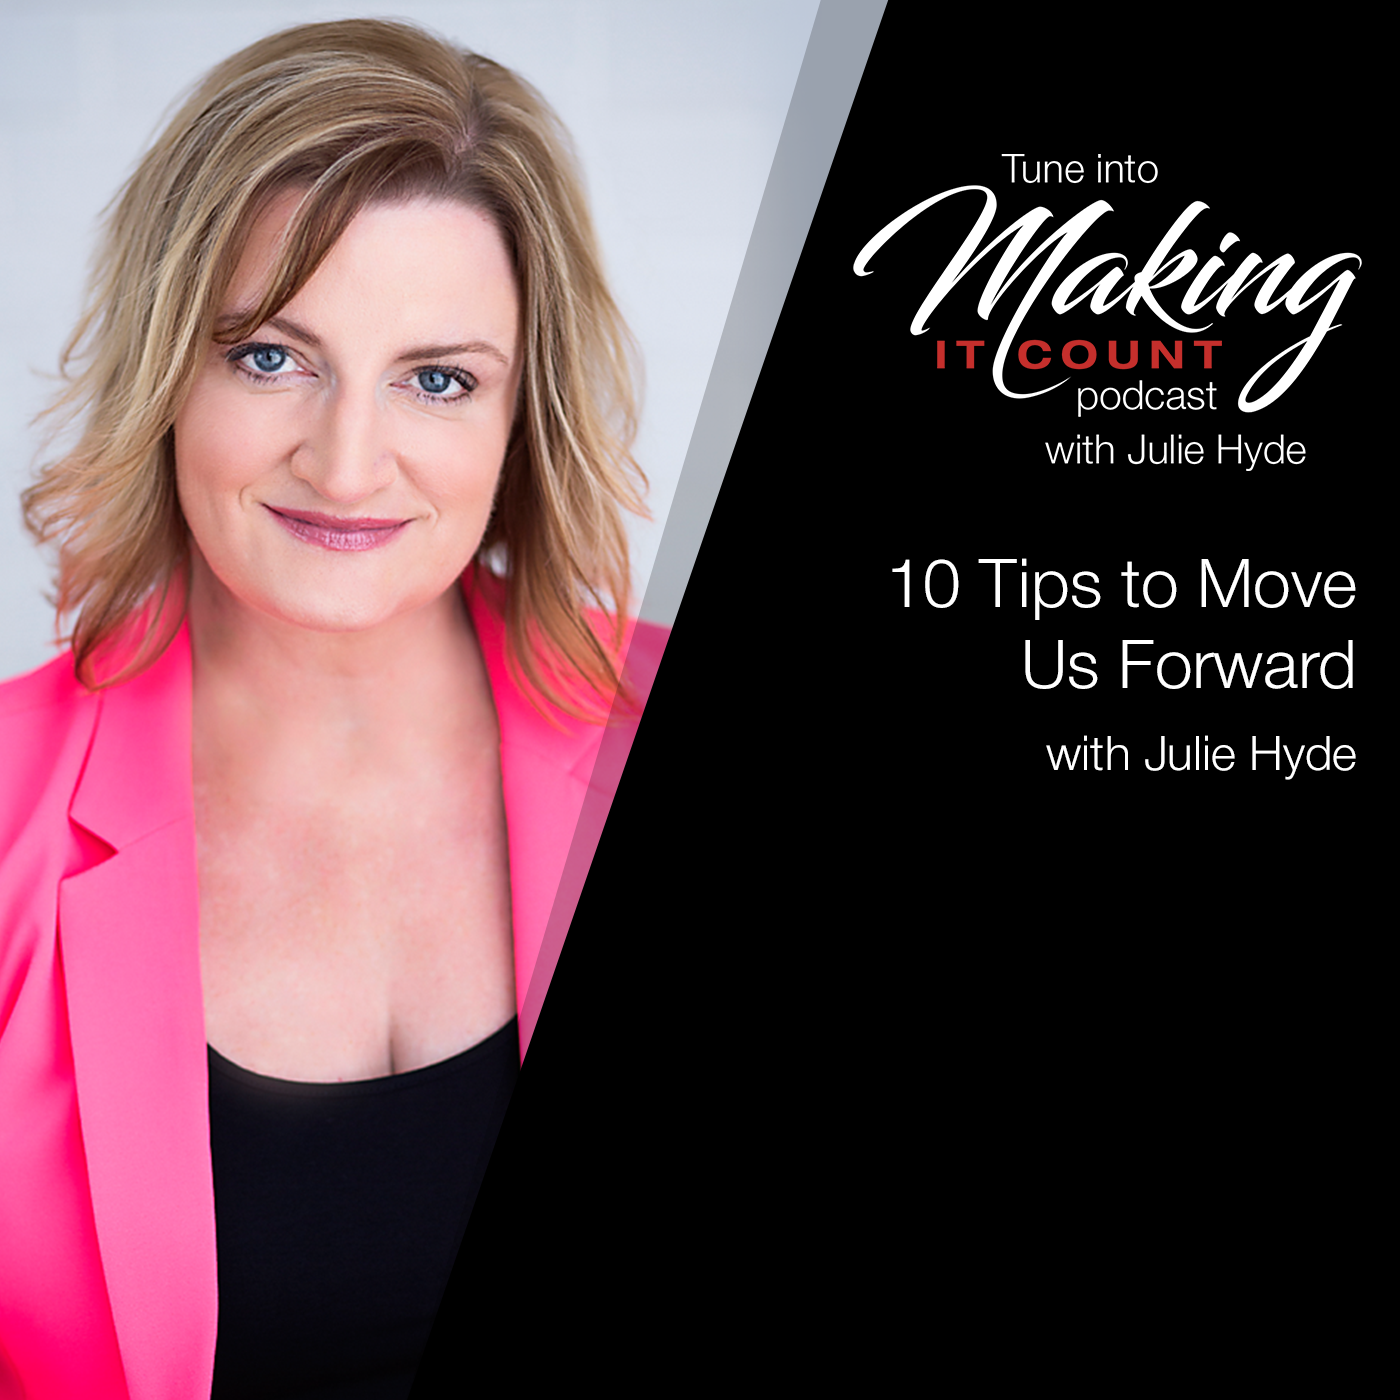 10-tips-to-move-us-forward-propel-julie-hyde-making-it-count-busy-leadership-leader-leaders-keynote-mindset-speaker-mentor-business-empower-lead-empowering-podcast-great-intentional-authentic-mentor-coach-role-model-top-best-inspire-engage-practical-insightful-boost-performance-tips-how-to-strategy-powerful-change-mindset-thrive-results-corporate-future-smart-program-mentorship-career-next-level-step-reconnect-control-proactive-agile-adaptable-one-on-one-woman-lady-boss-female-sydney-australia-speaker-host-guide-guidance-business-ceo-management